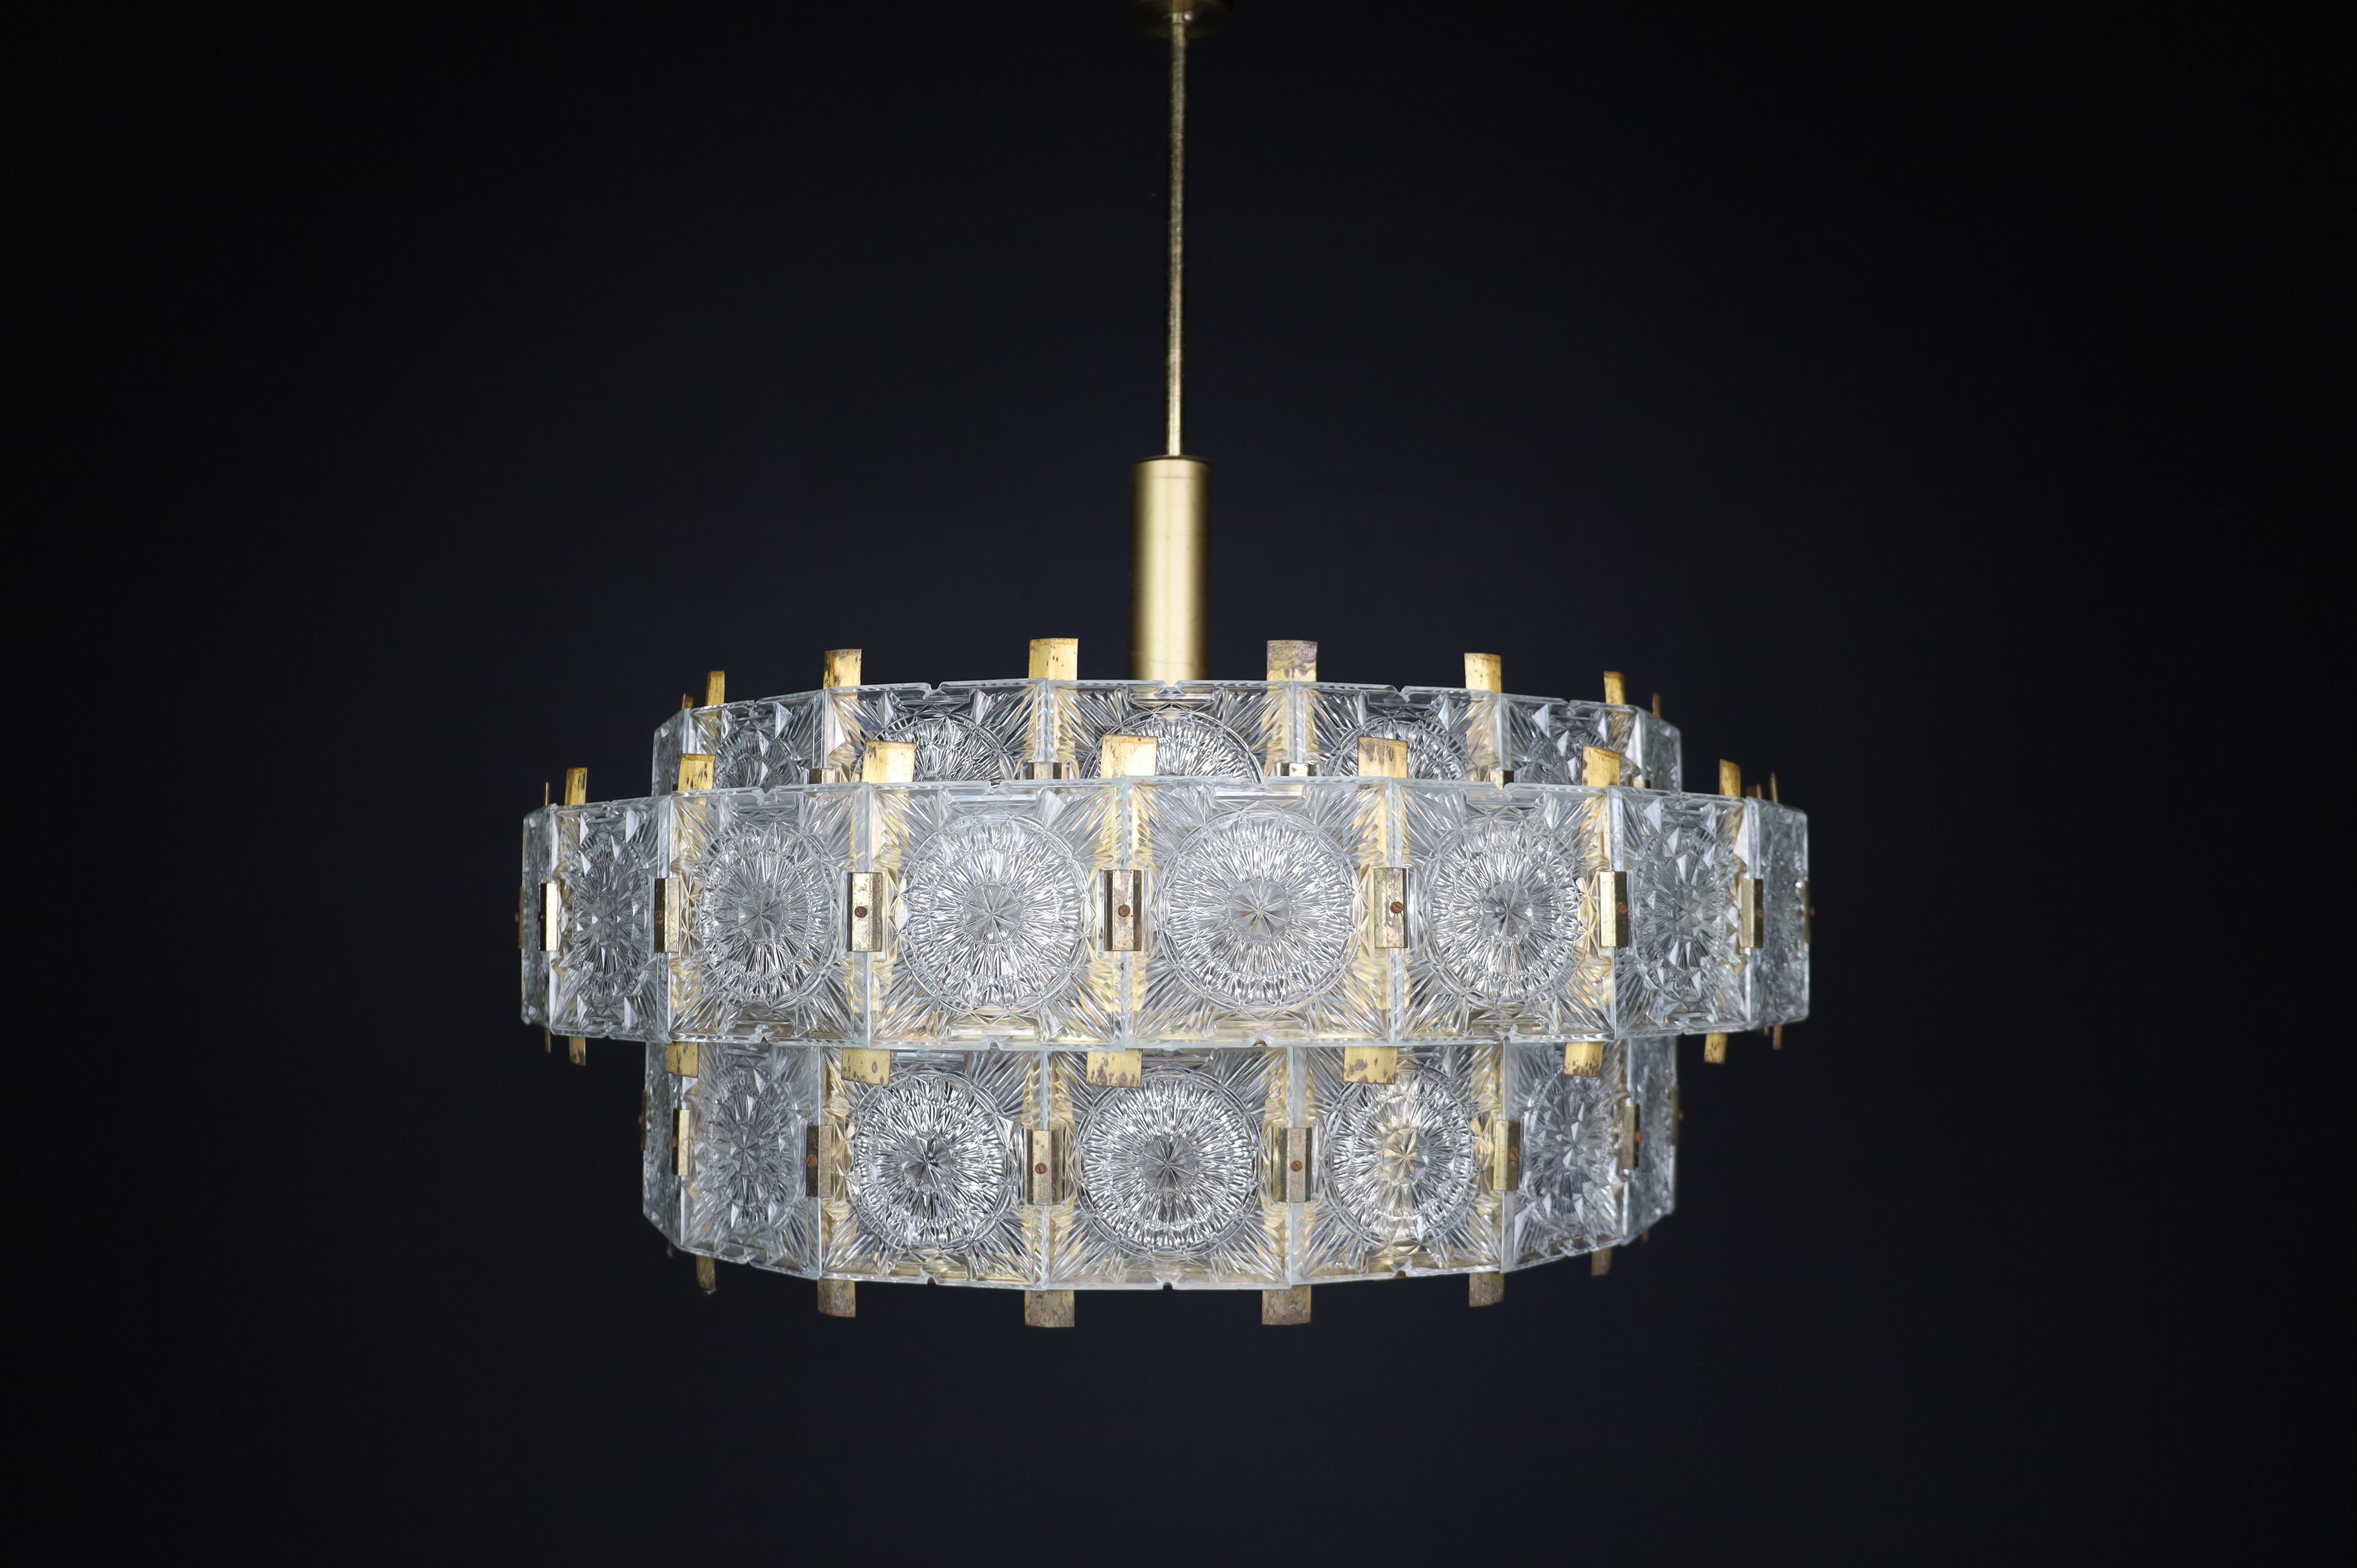 Large Extravagant Chandelier with Patinated Brass Fixture, Praque, 1960s For Sale 5